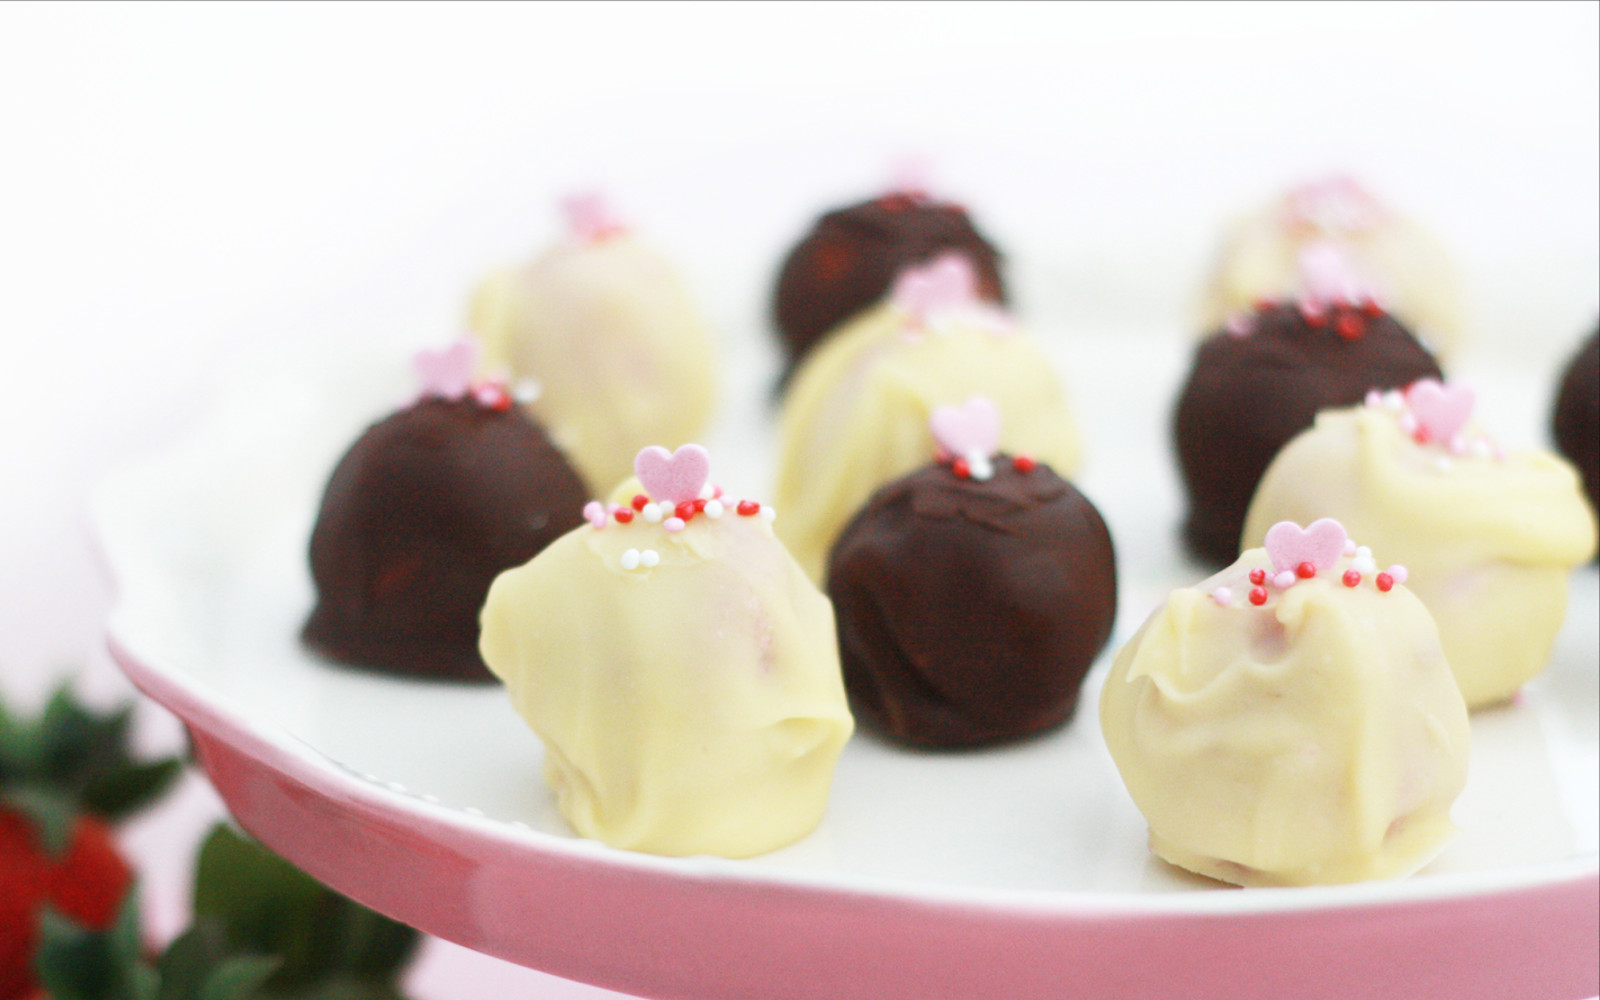 Strawberry and coconut truffle with a chocolate coating